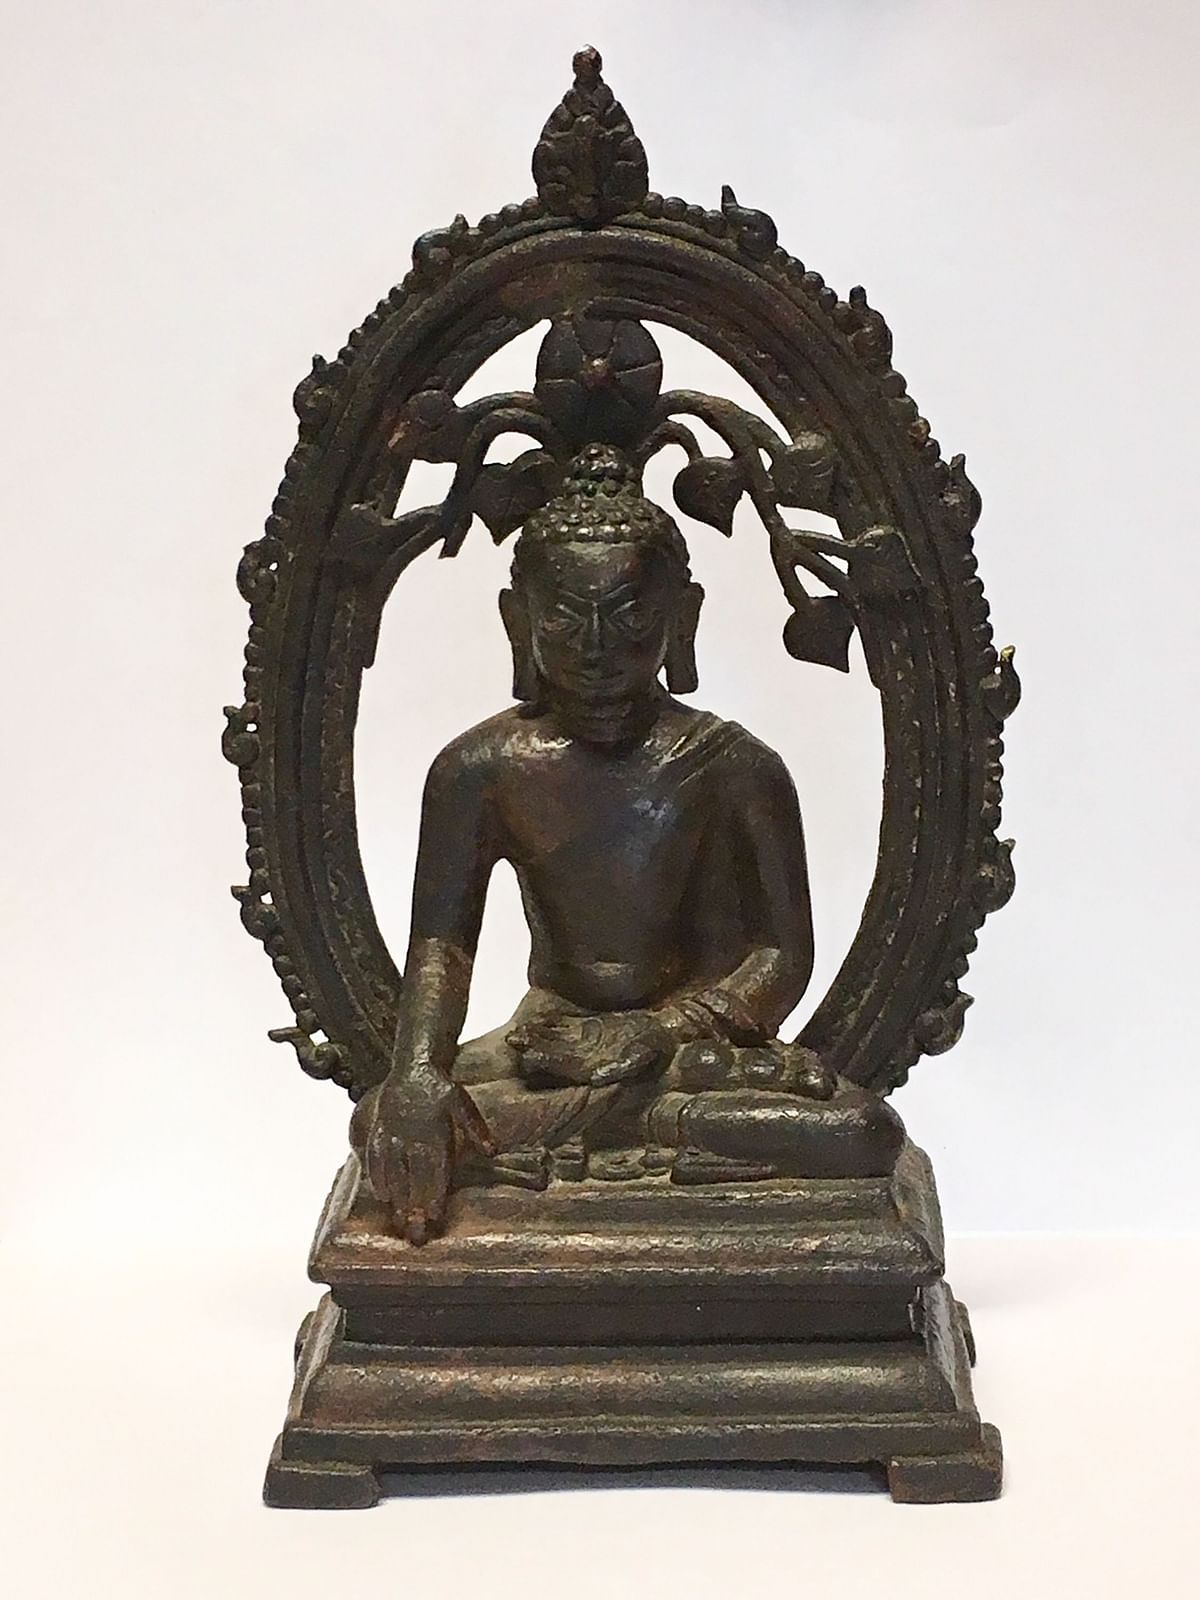 An undated handout picture released by the British Metropolitan Police Service (MPS) in London on 15 August 2018, shows a 12th century Buddha statue stolen from India 57 years ago that is to be returned to the Indian High Commissioner in London. Photo: AFP